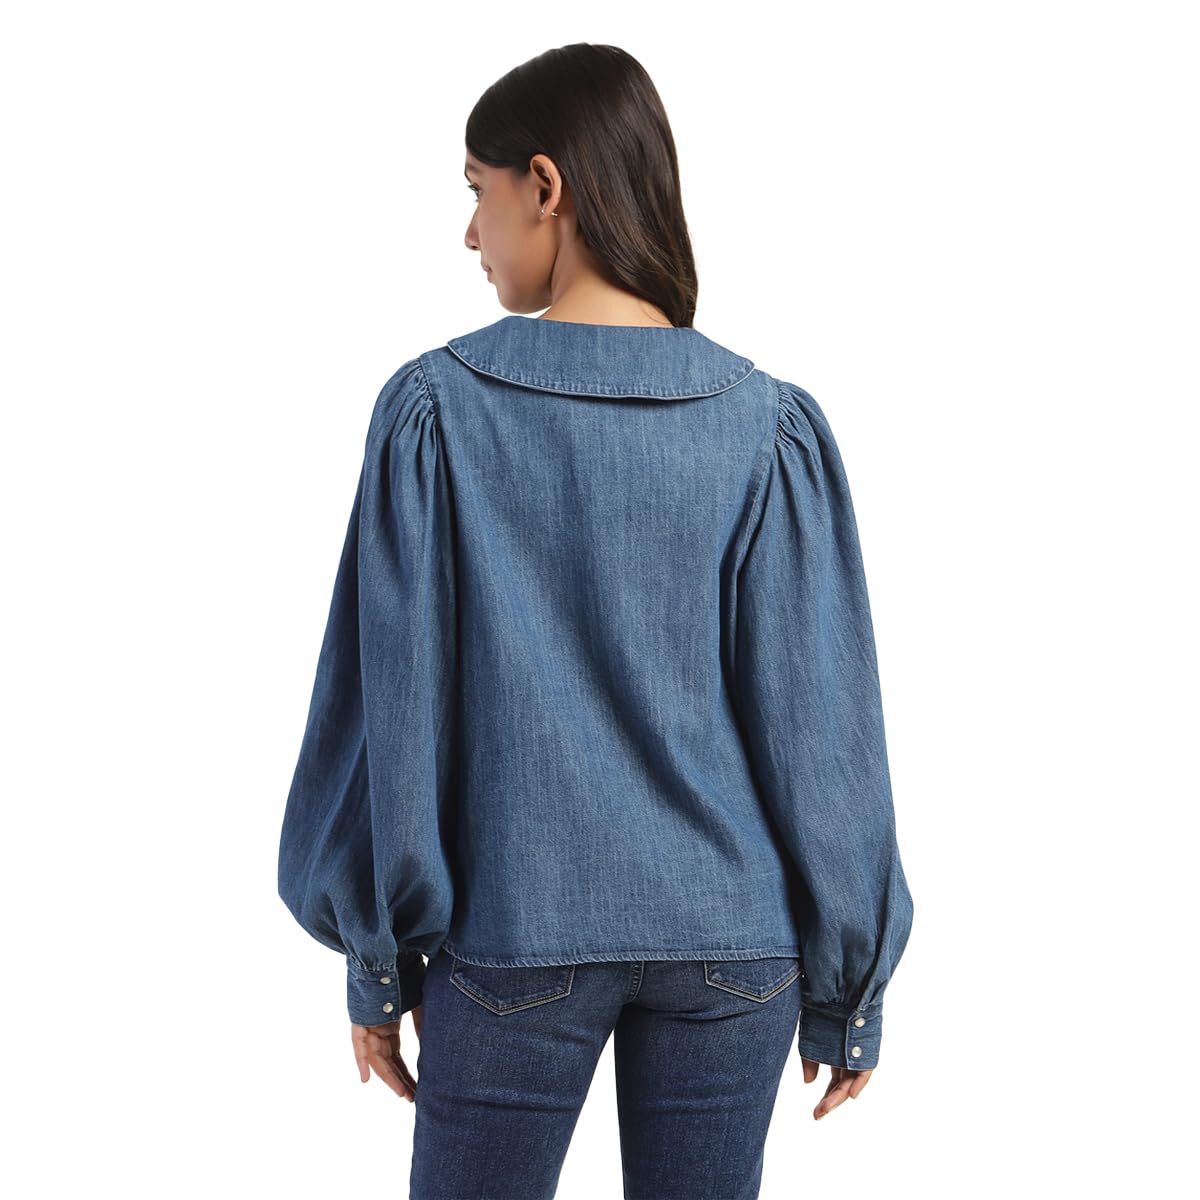 Levi's Women's Relaxed Fit Shirt (A5132-0000M_Blue